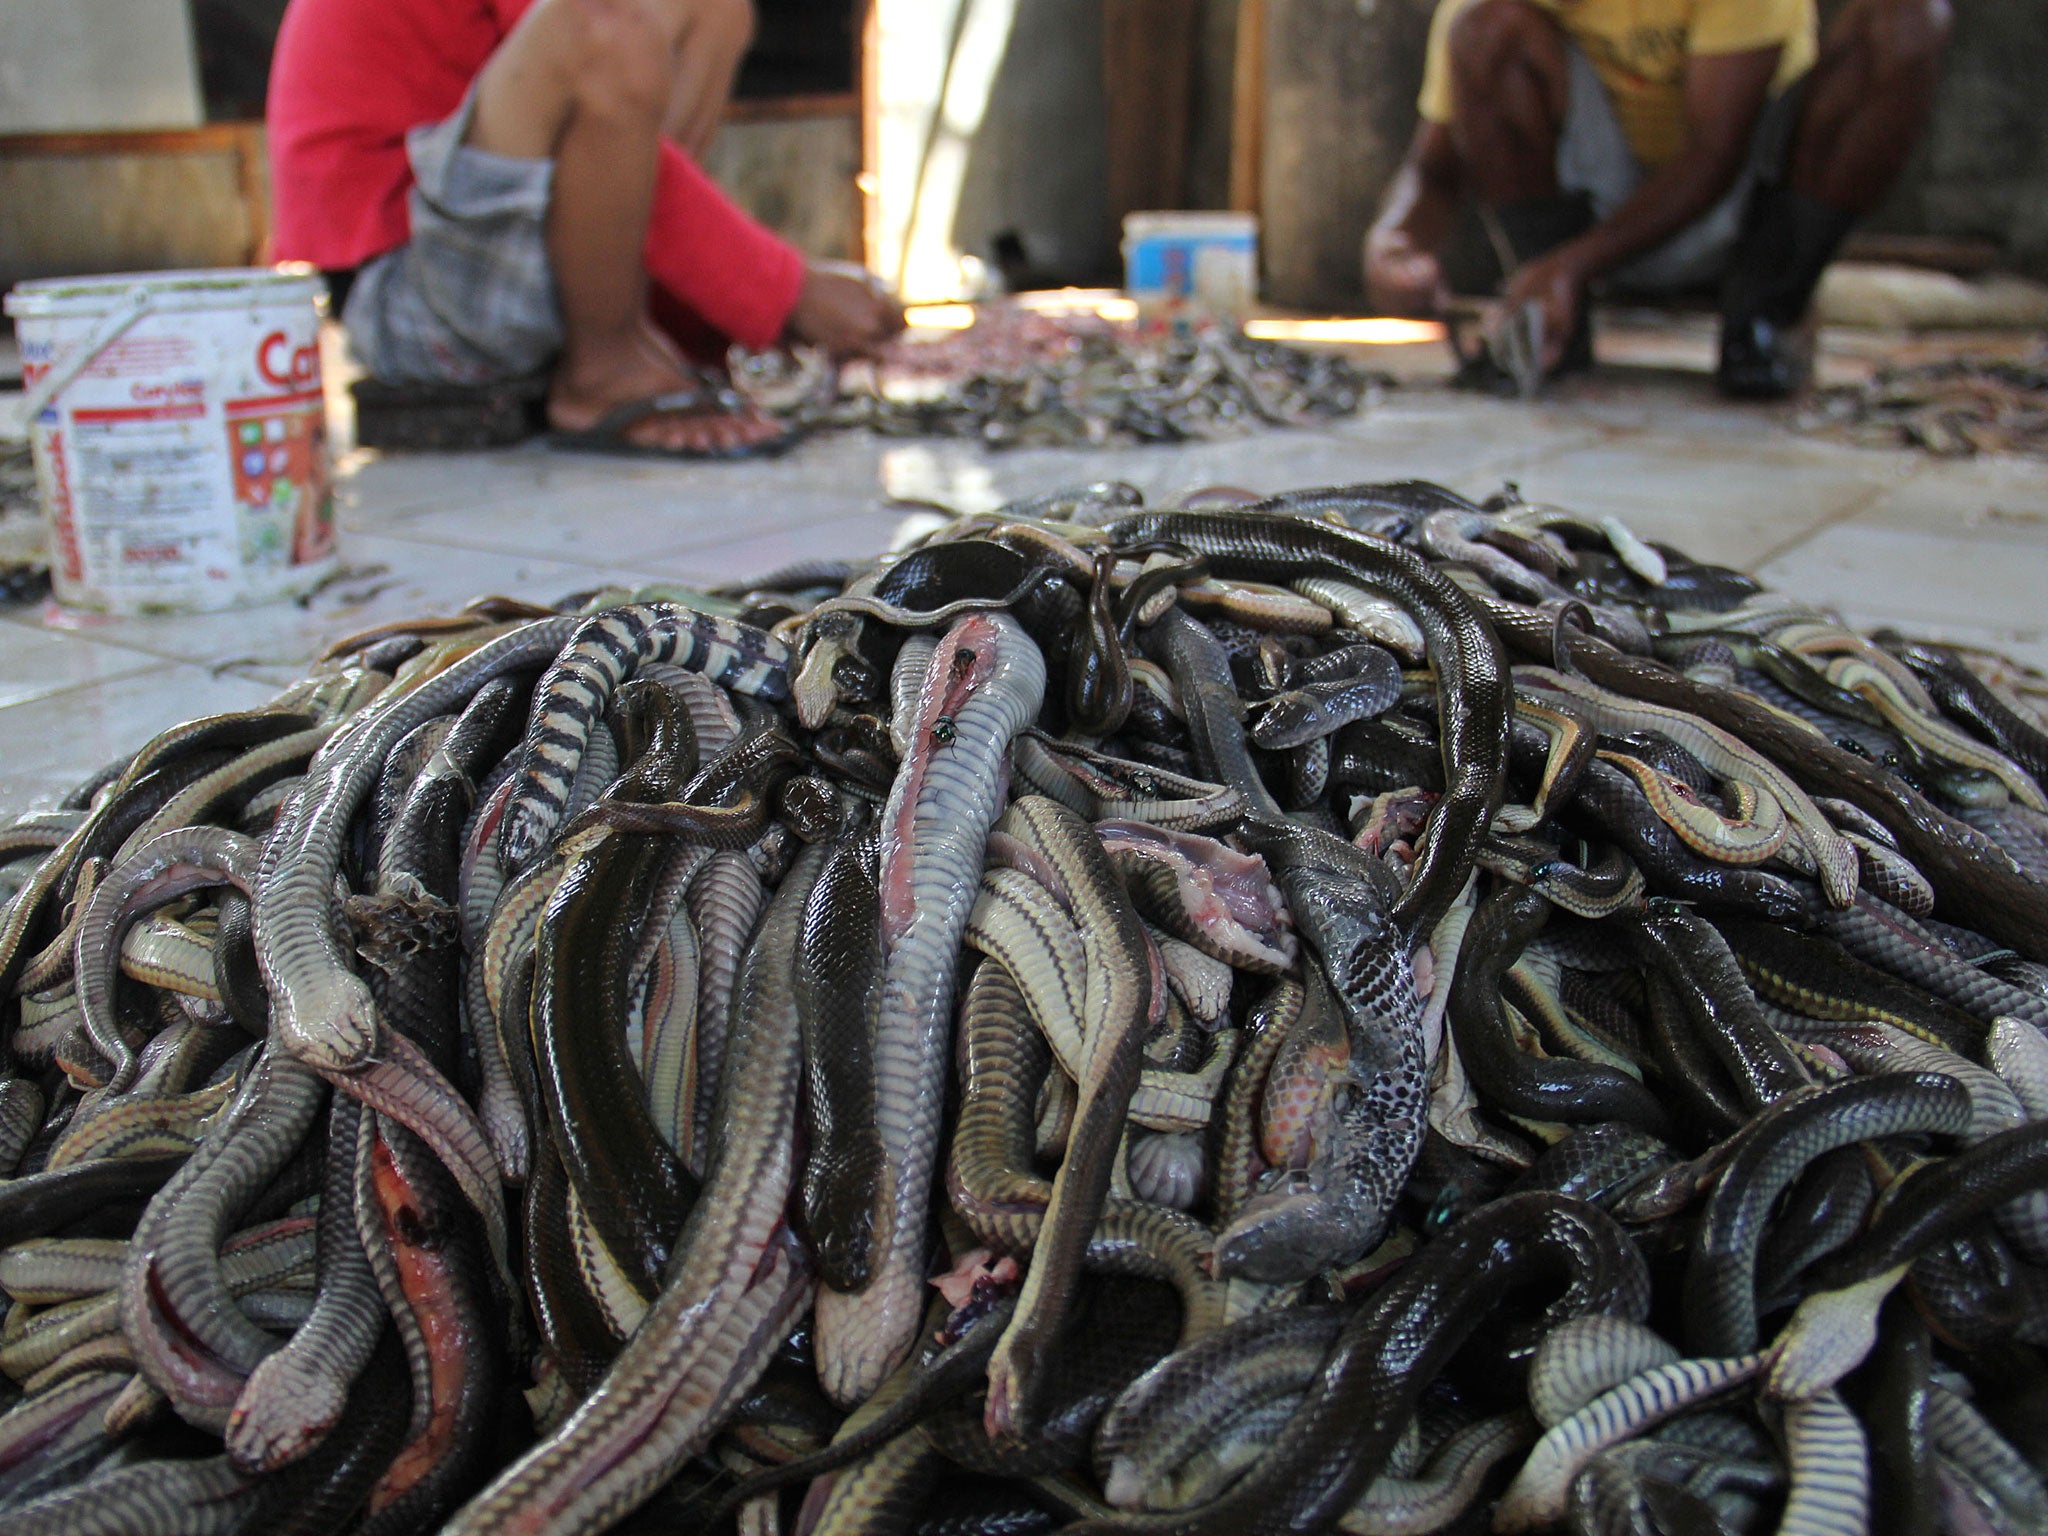 Workers prepare snake skins in the village of Kertasura, Cirebon. At slaughter house snake skins measuring in the hundreds of metres, are sold to bag factories in the West and Central Java provinces on a monthly basis